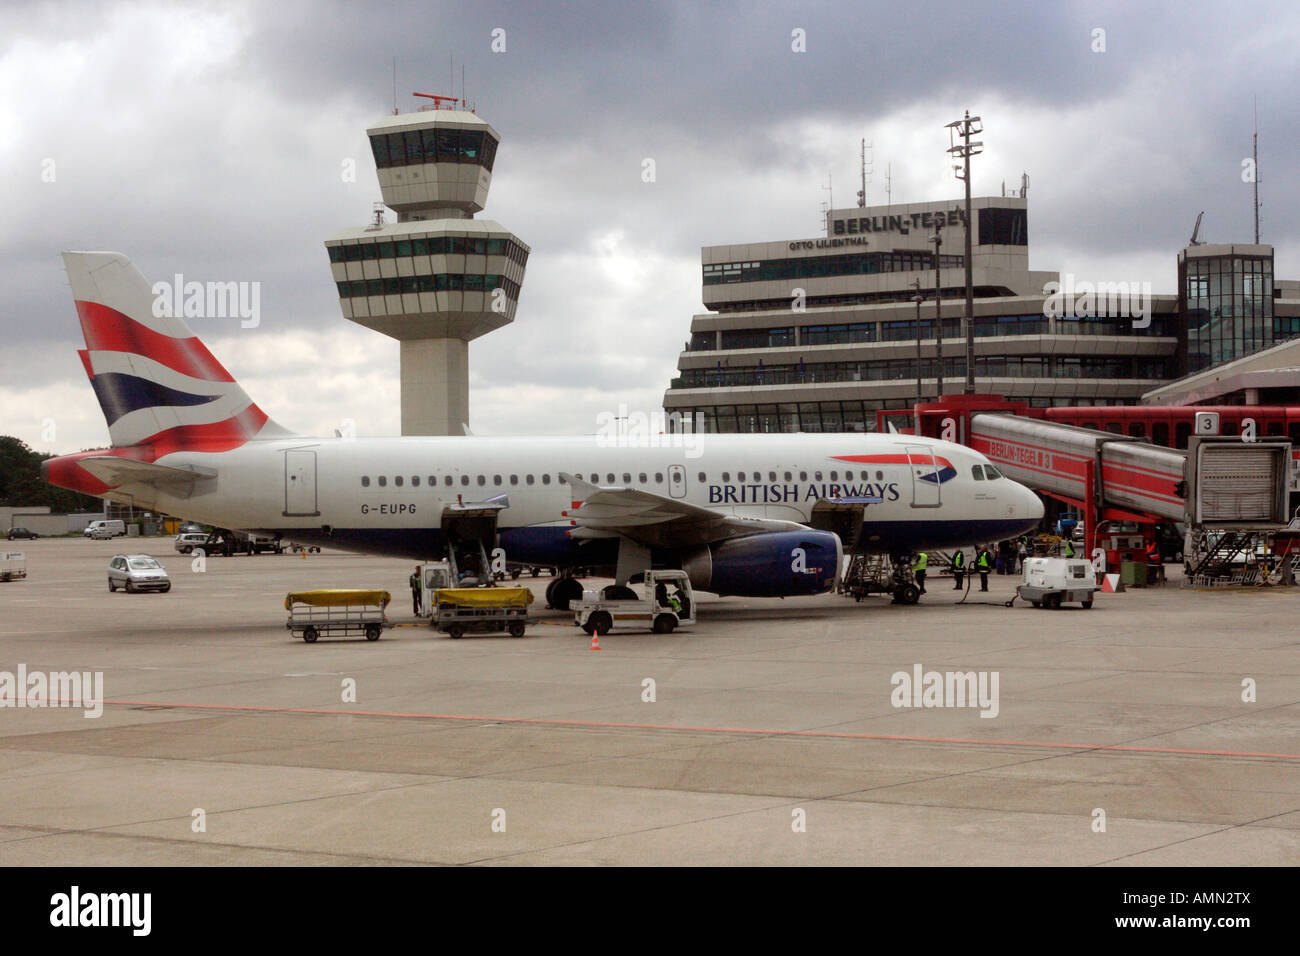 A British Airways plane at an airport, Berlin, Germany Stock Photo